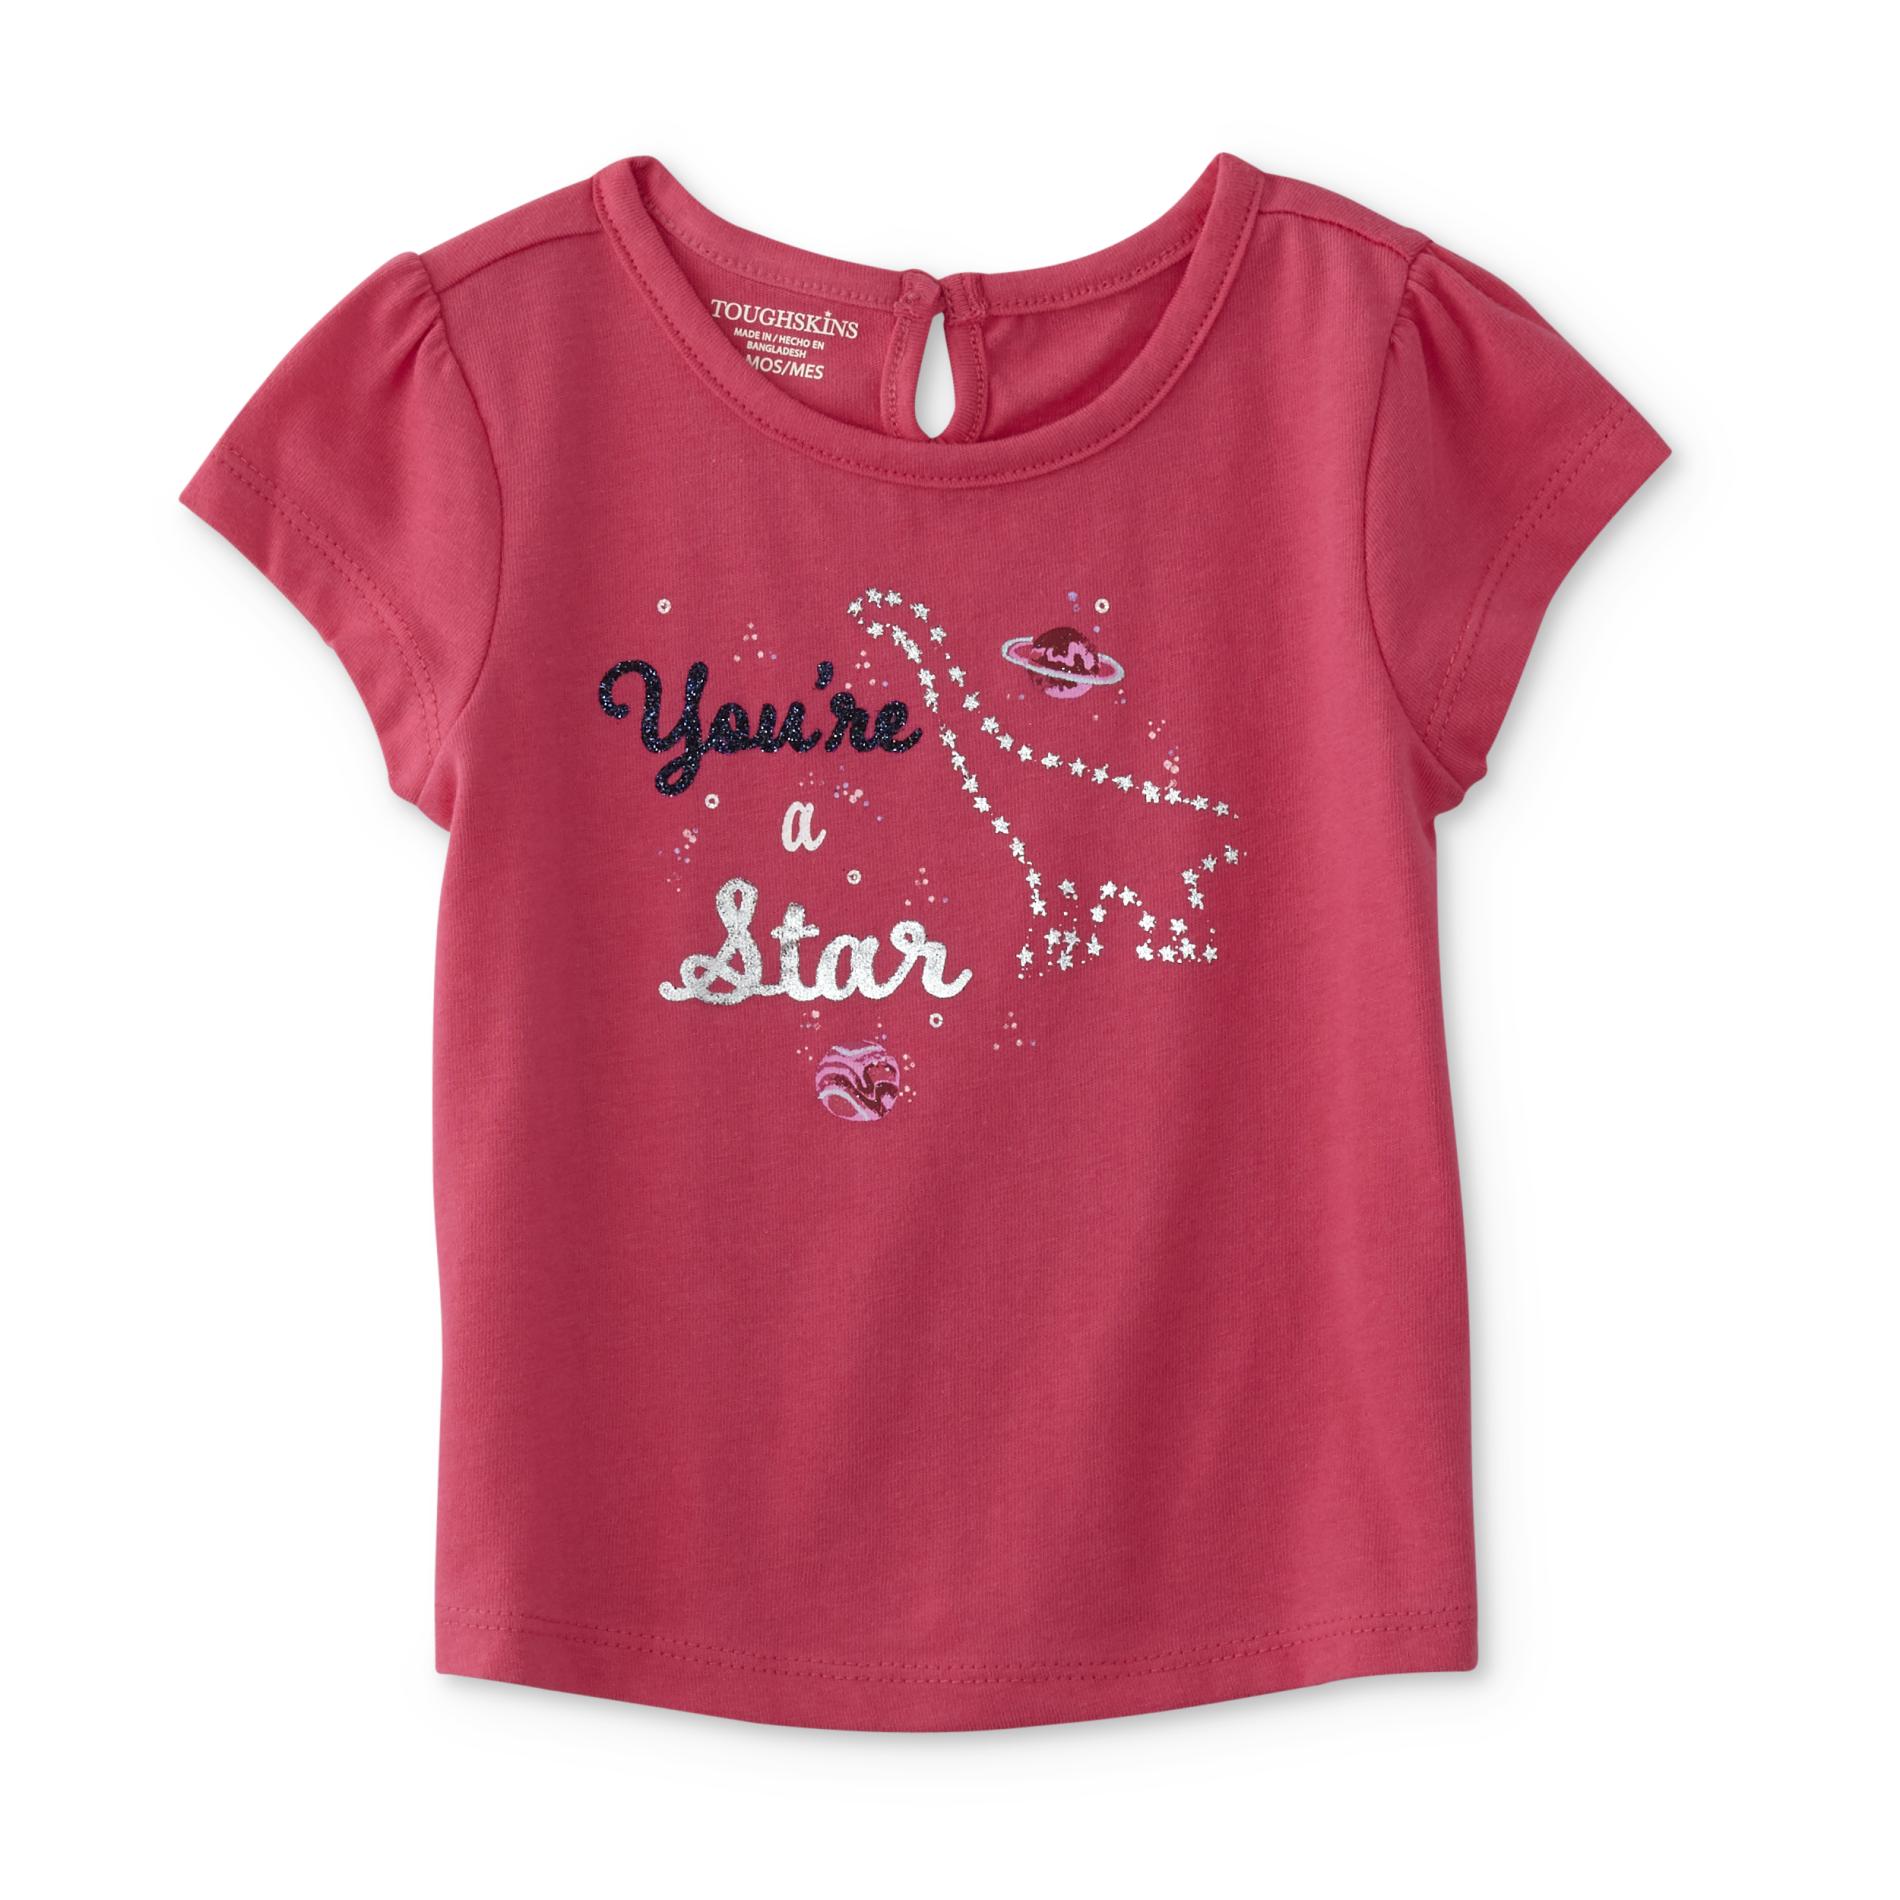 Toughskins Infant & Toddler Girls' Graphic T-Shirt - You're A Star